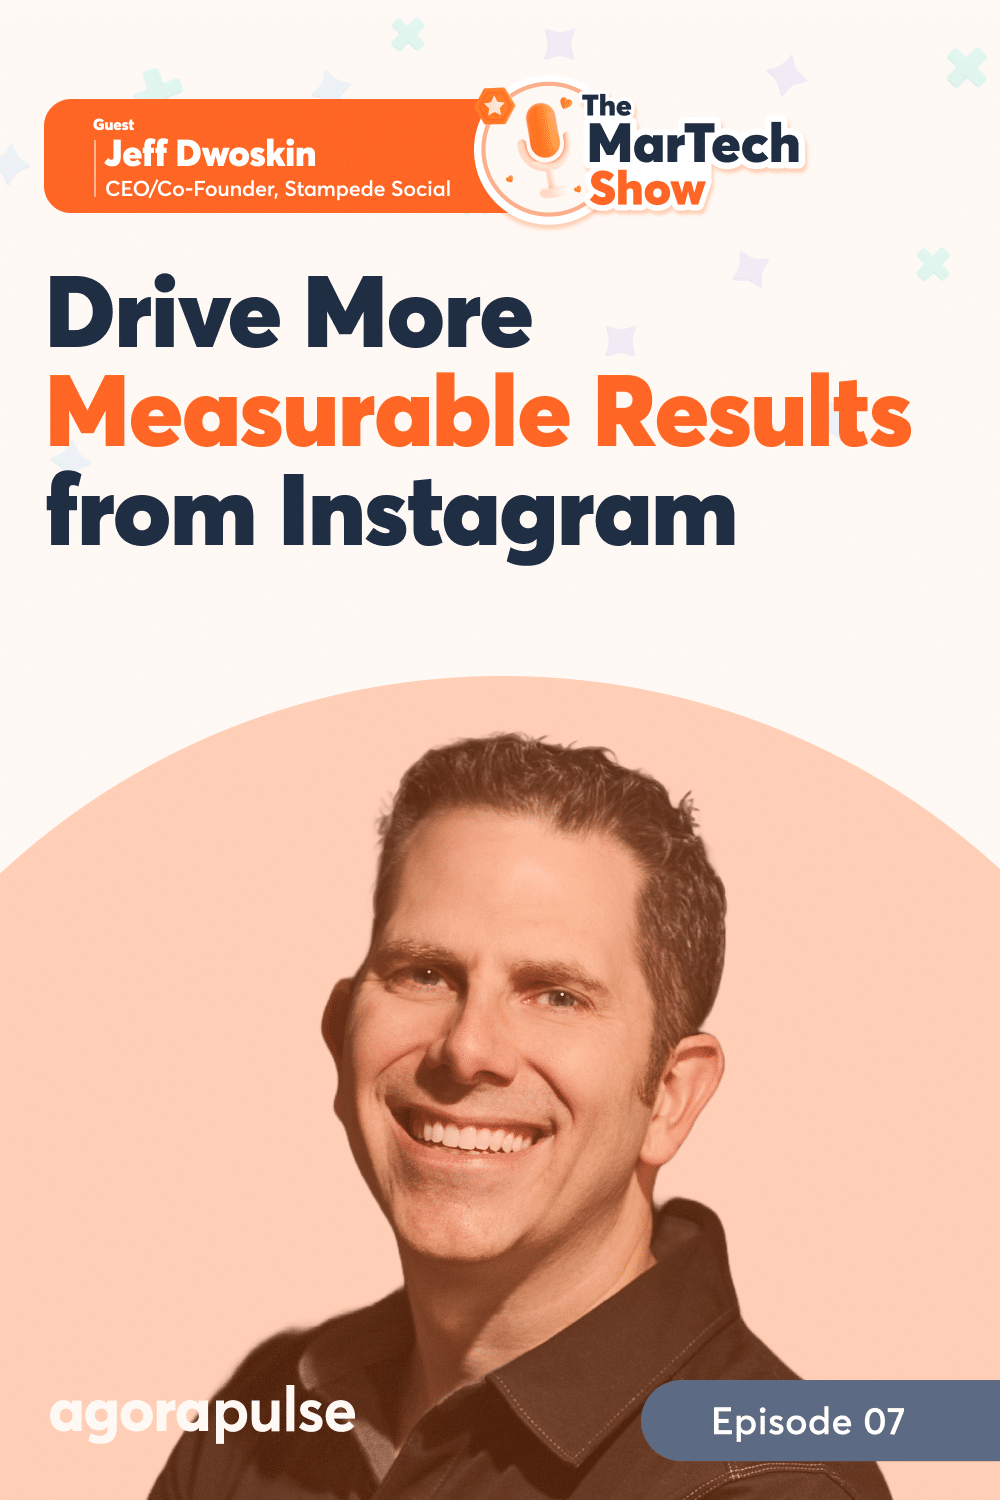 How to Drive Better Results From Instagram [Podcast & Recap]